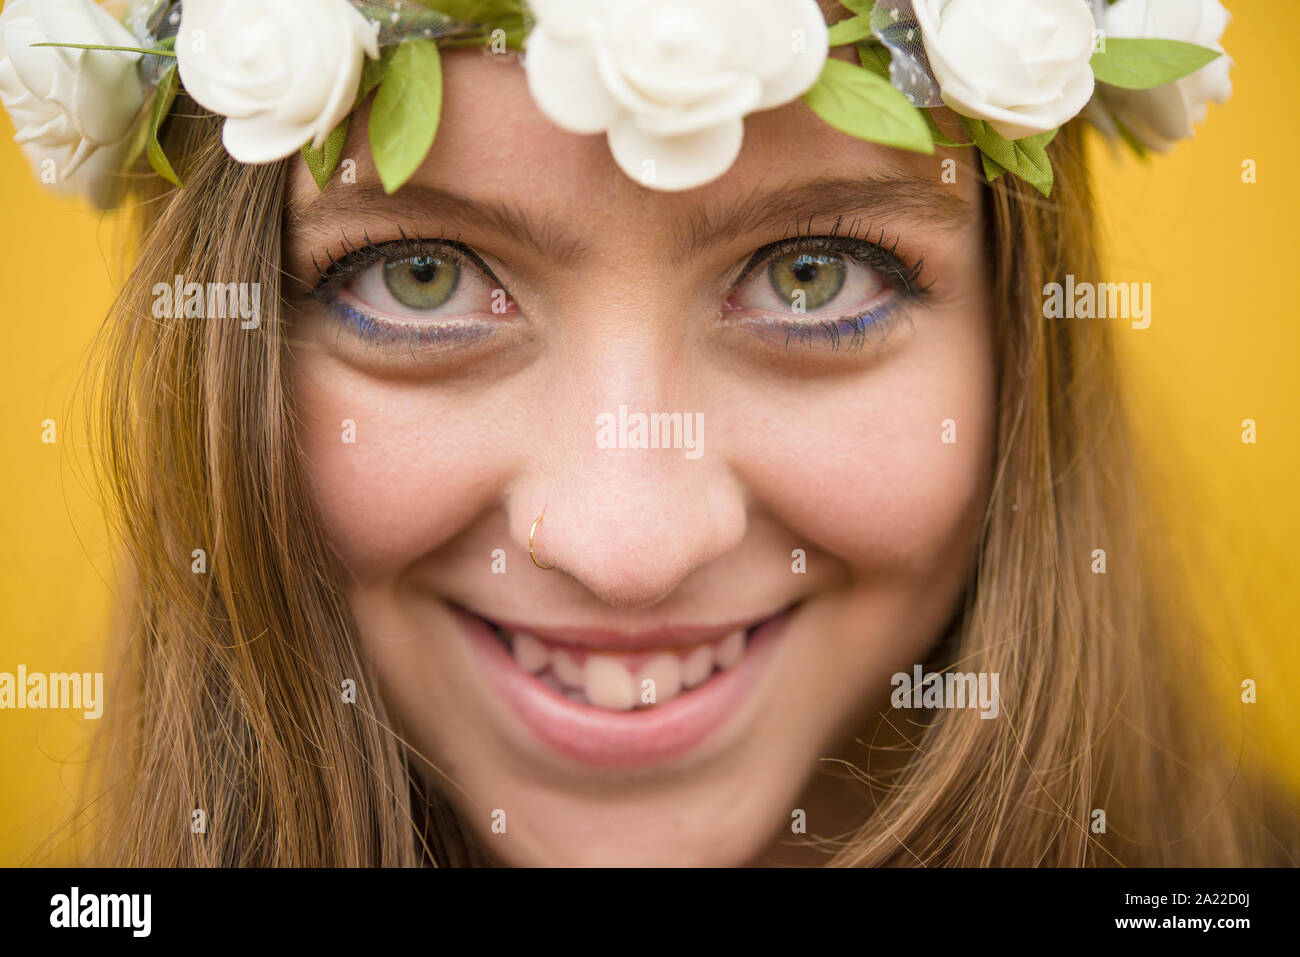 Beautiful blond girl with green eyes wearing flowery wreath Stock Photo